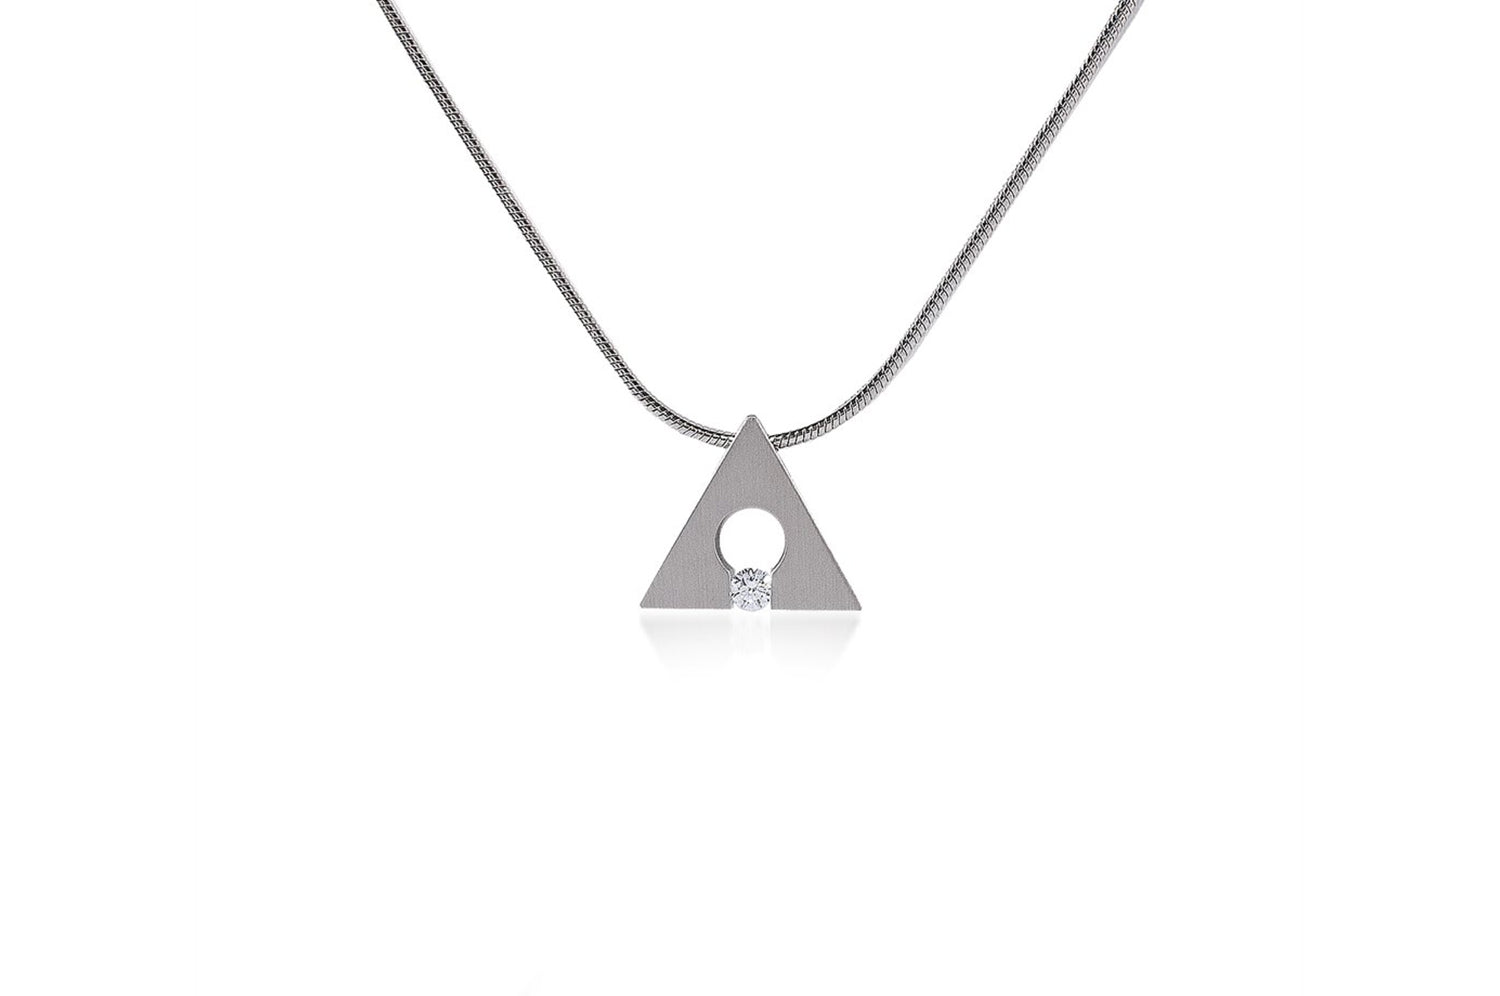 Supera Stainless Steel Necklace